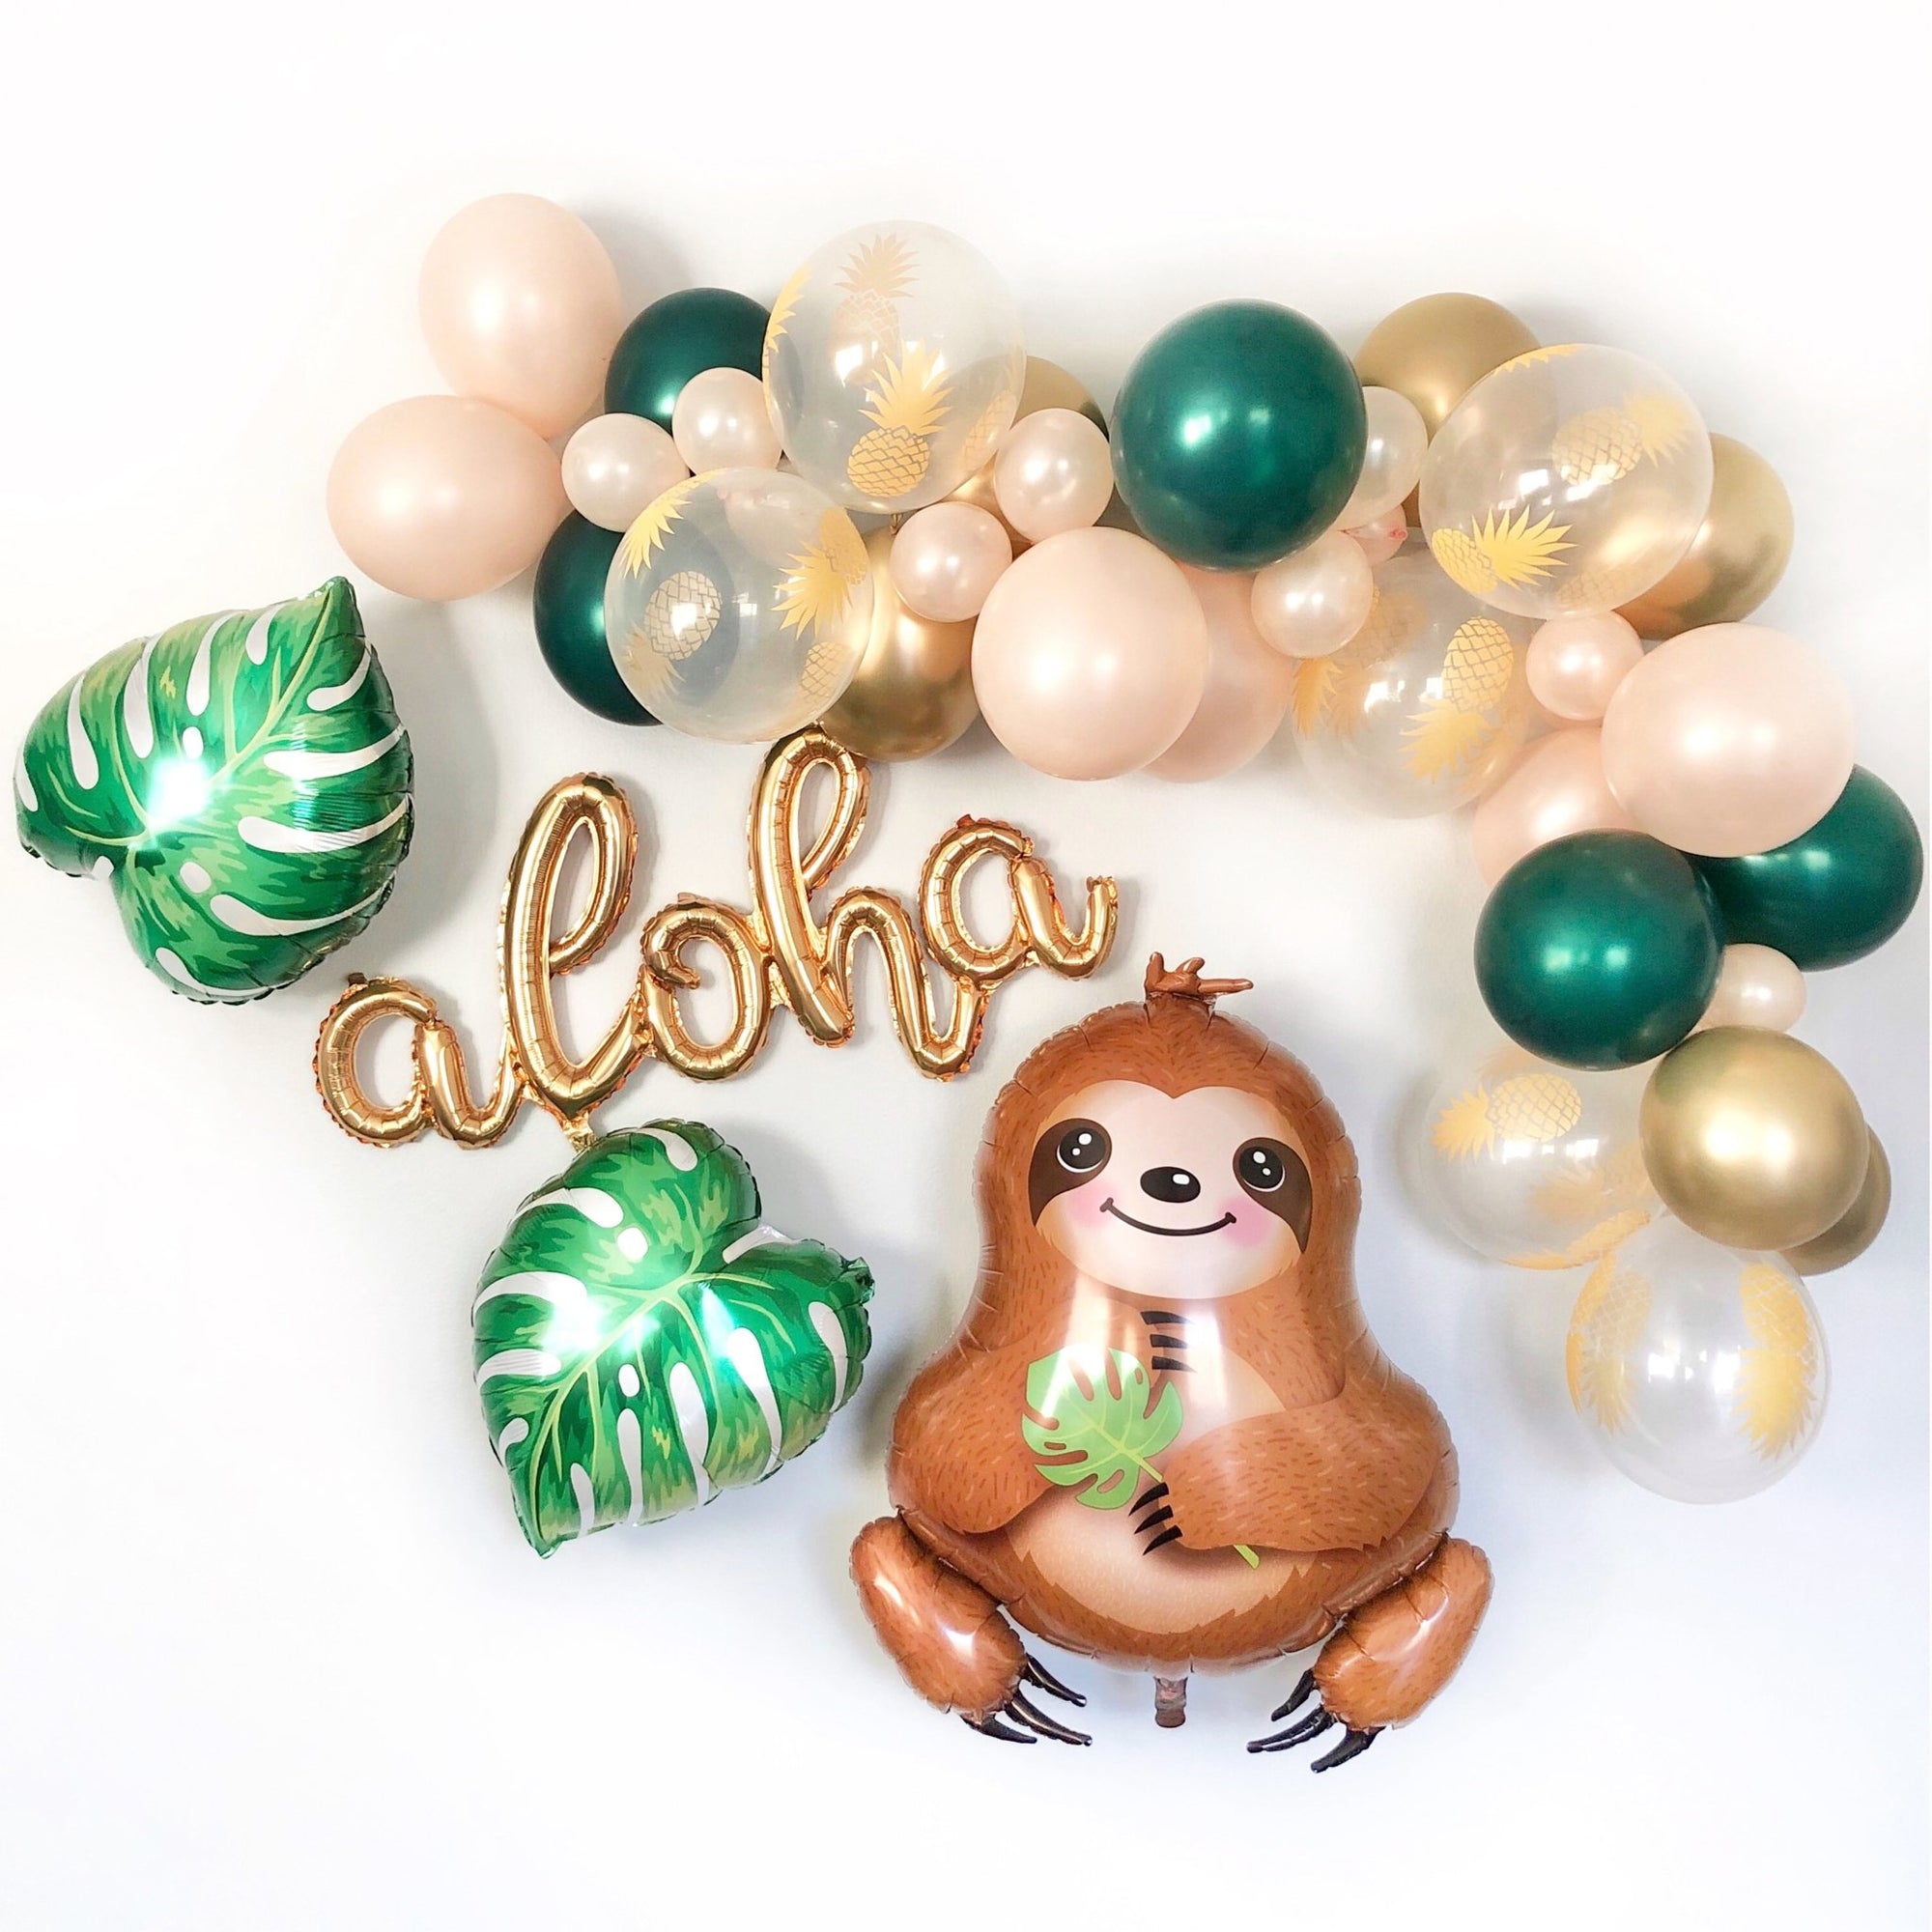 Baby Sloth Balloon Garland Kit - Pretty Collected